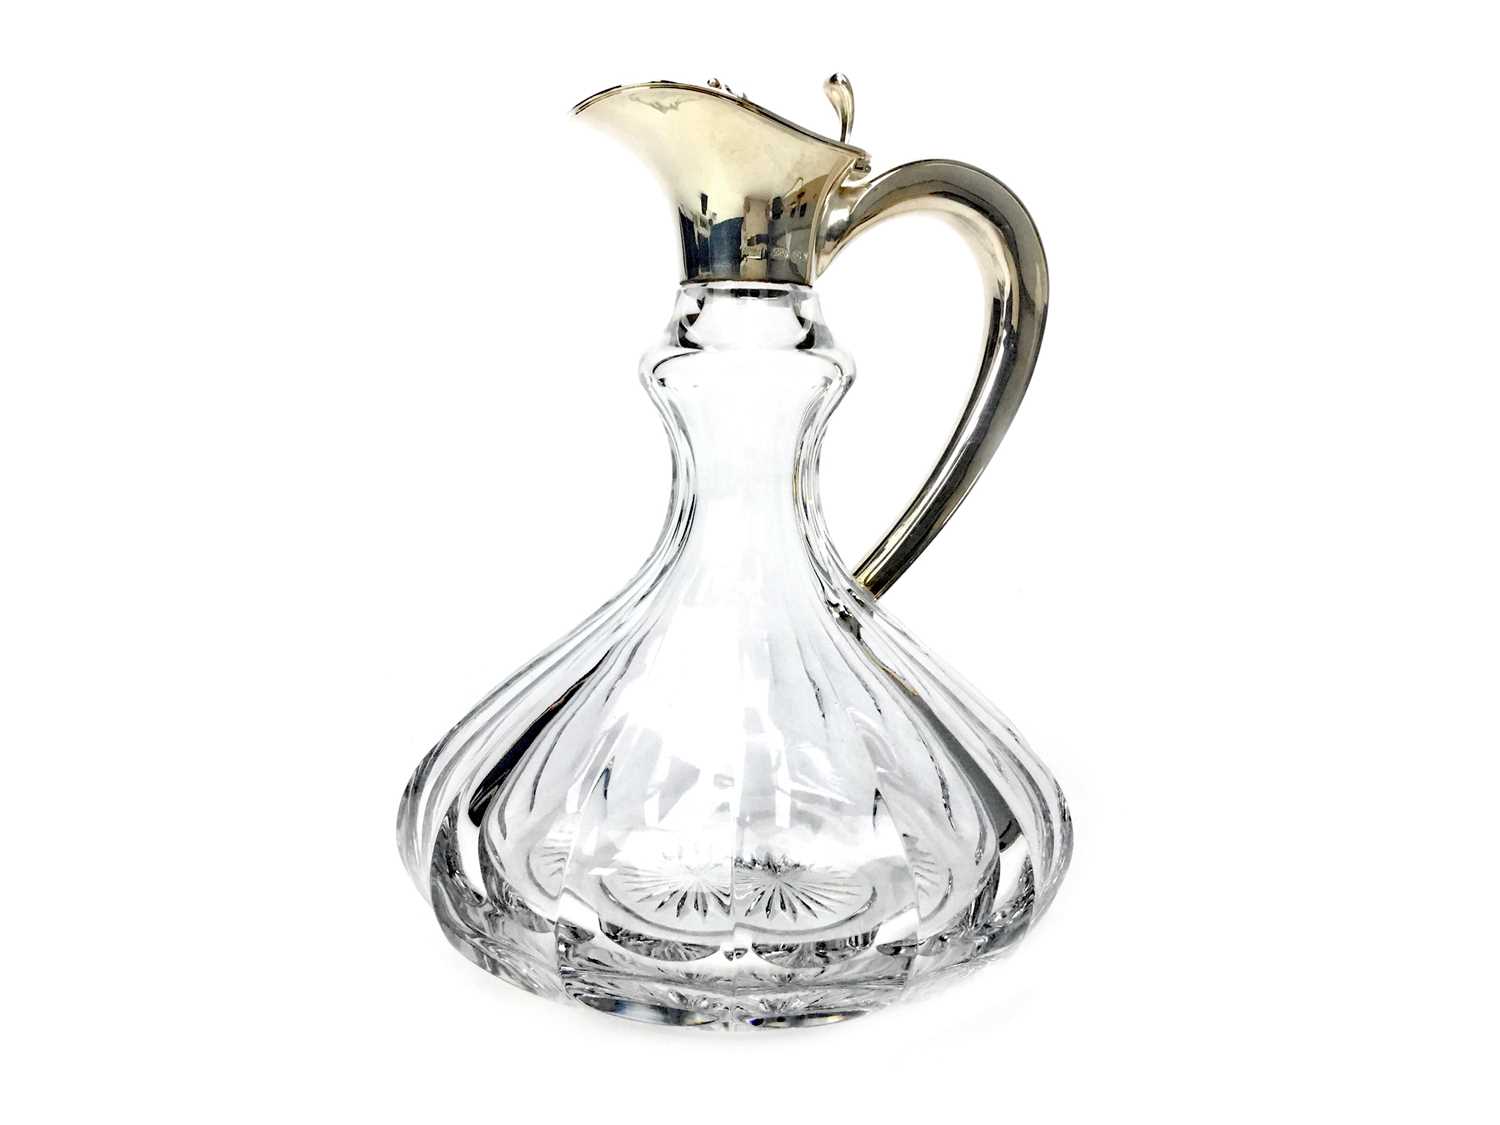 Lot 426 - A SILVER MOUNTED CLARET JUG